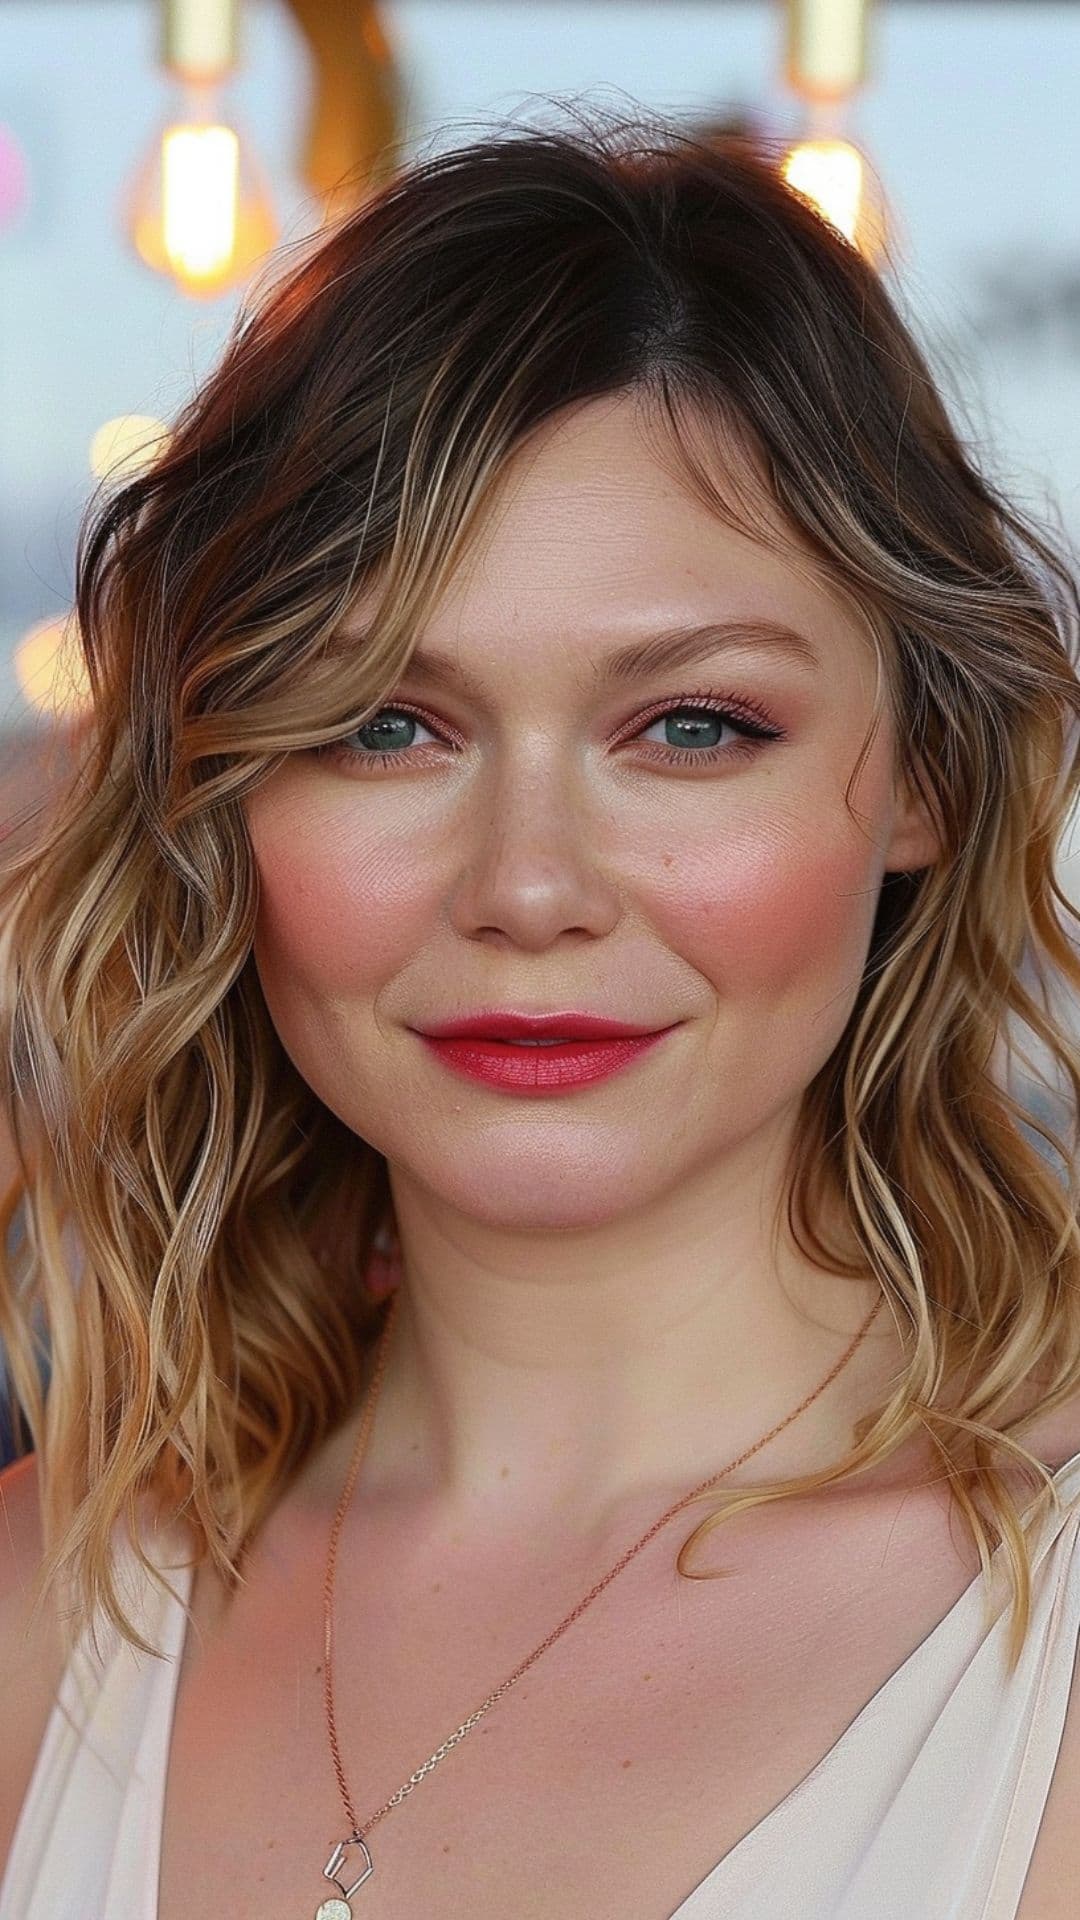 A woman modelling Kirsten's Dunst side-parted waves with deep side bangs.